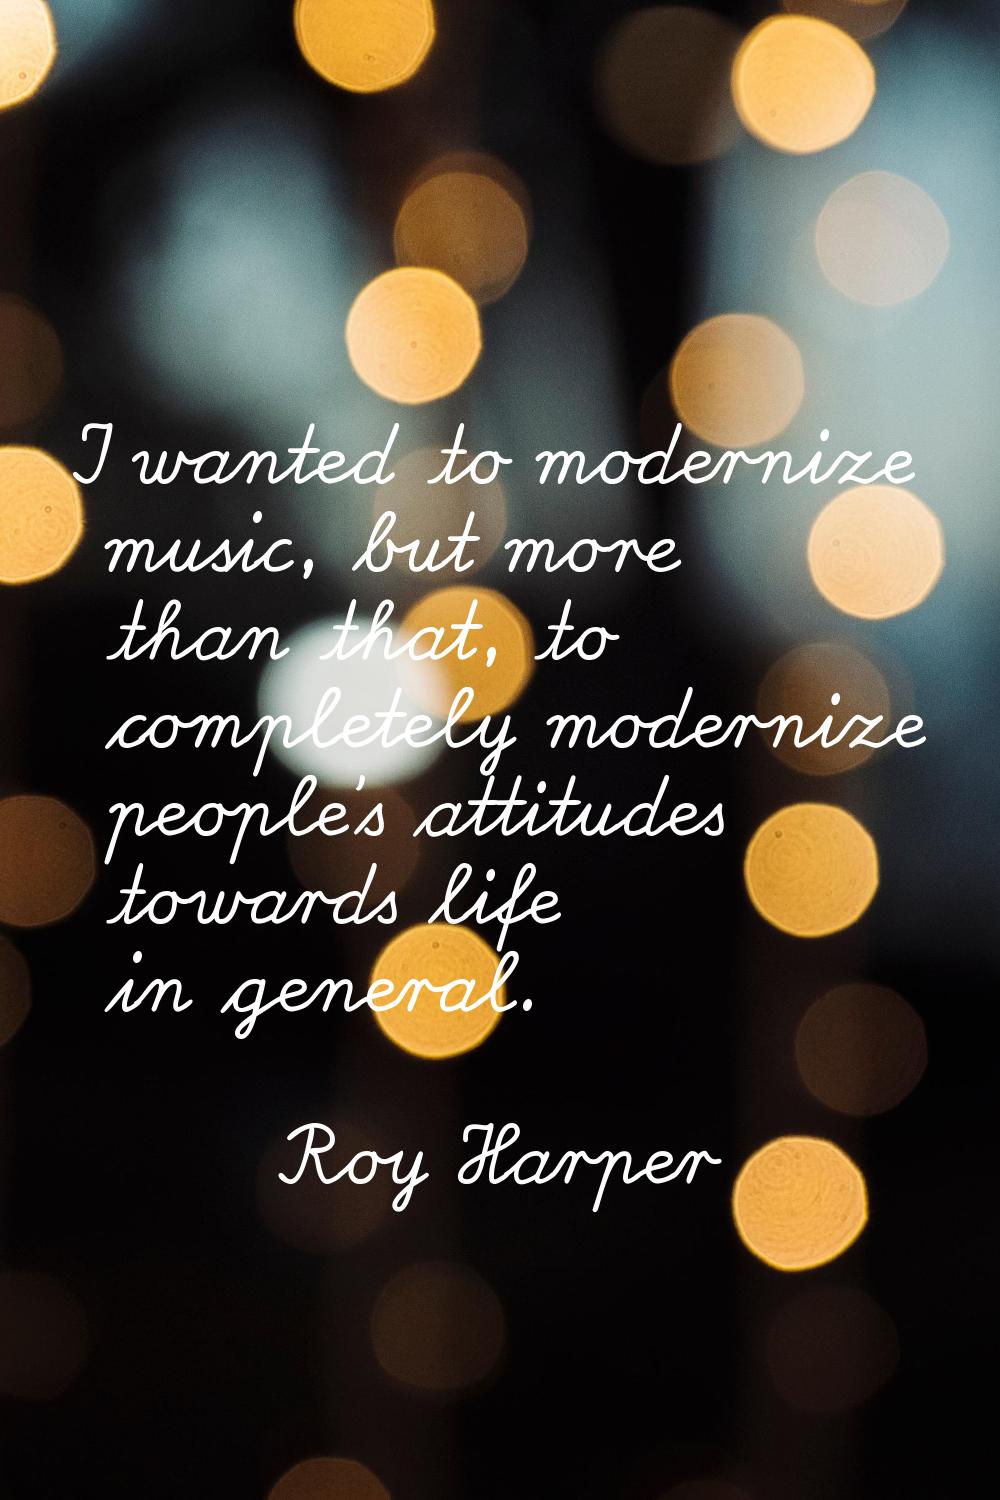 I wanted to modernize music, but more than that, to completely modernize people's attitudes towards